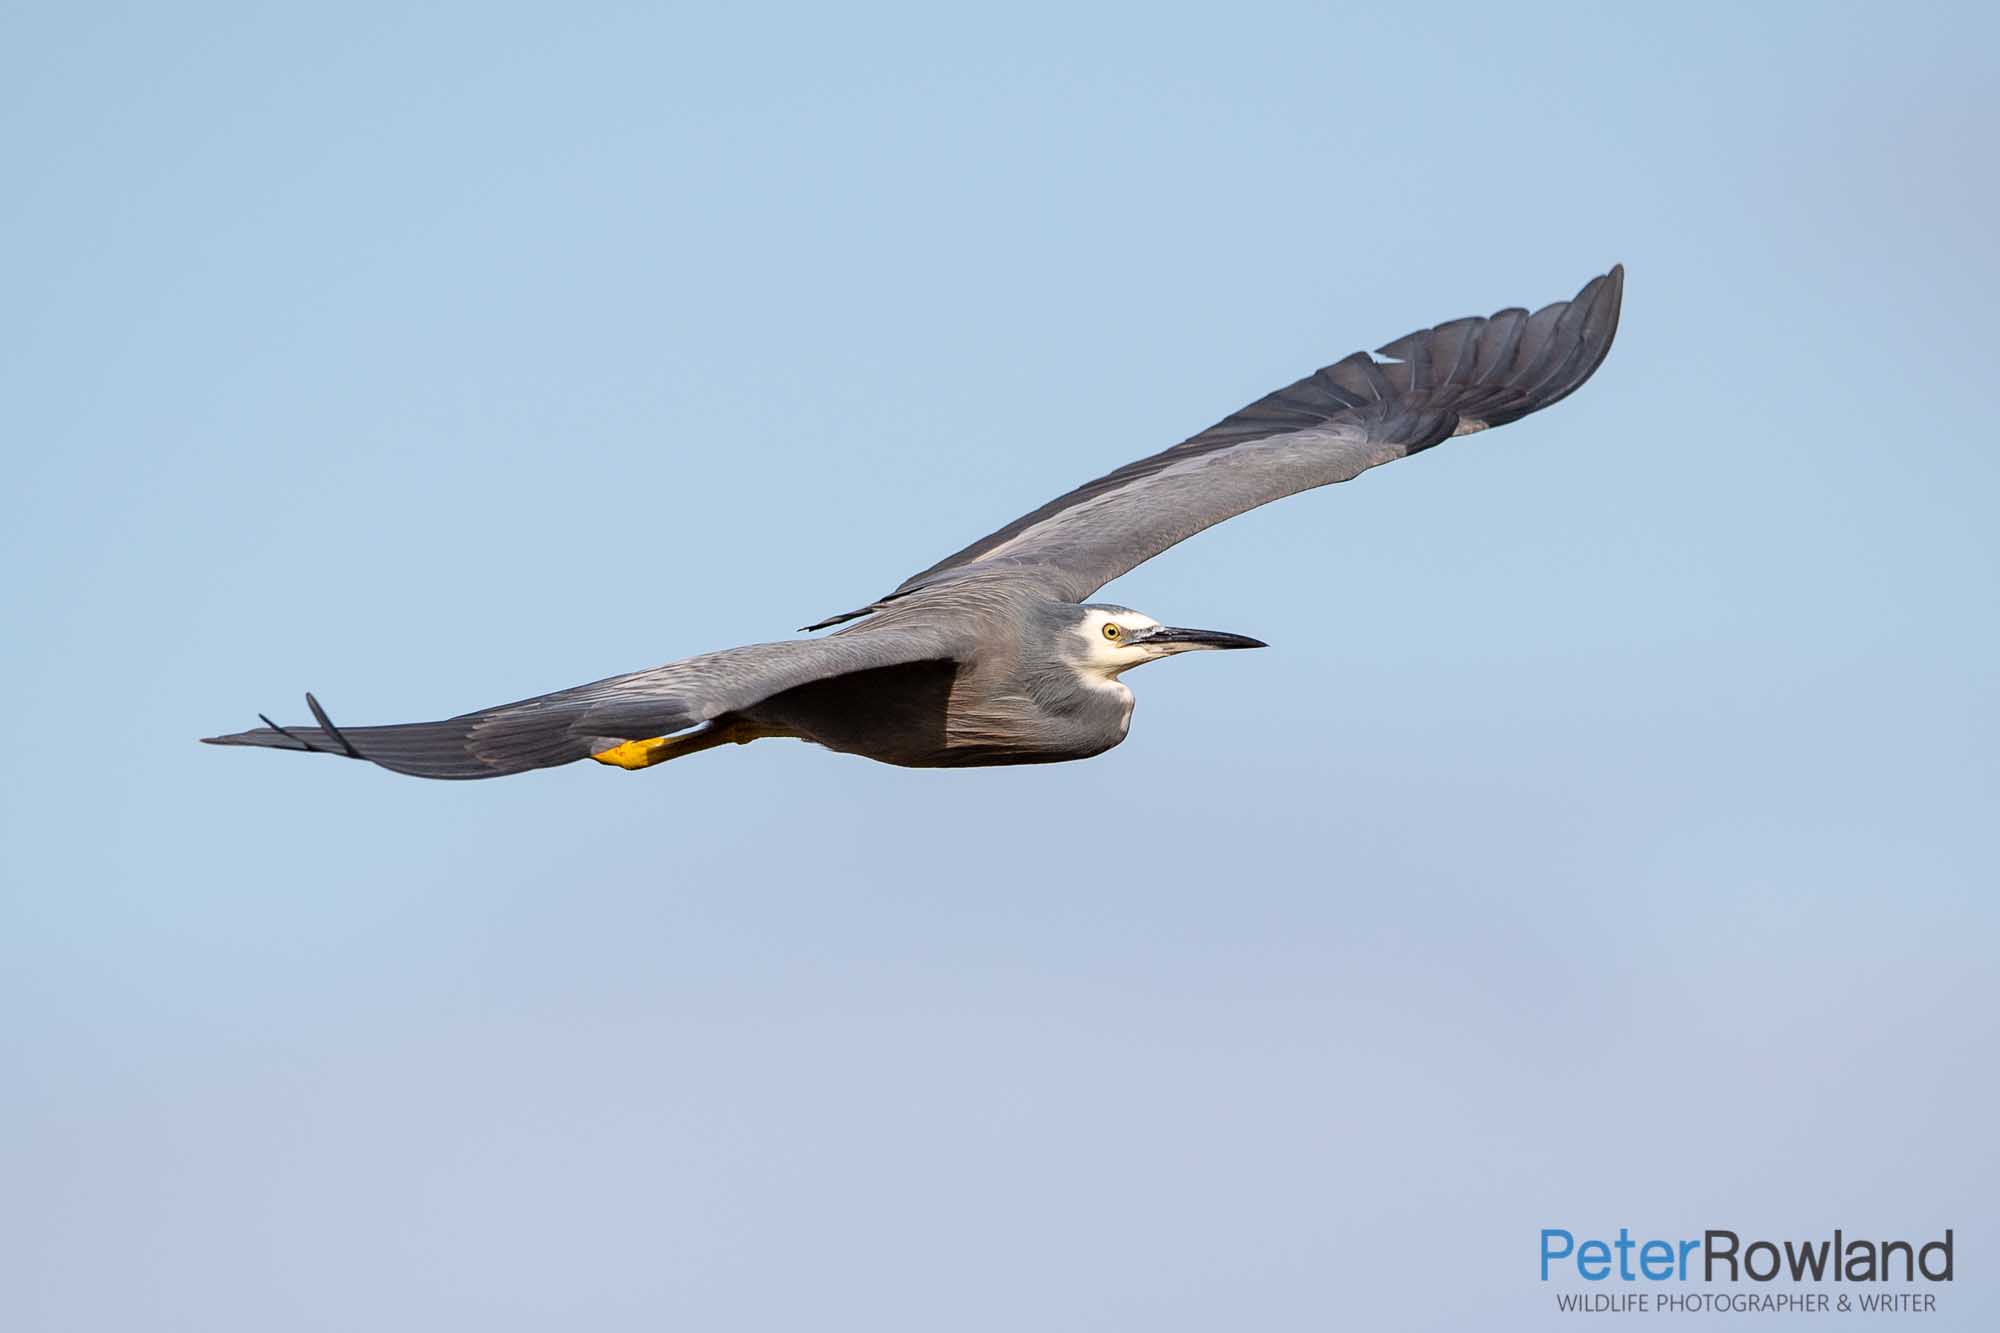 A White-faced Heron in flight